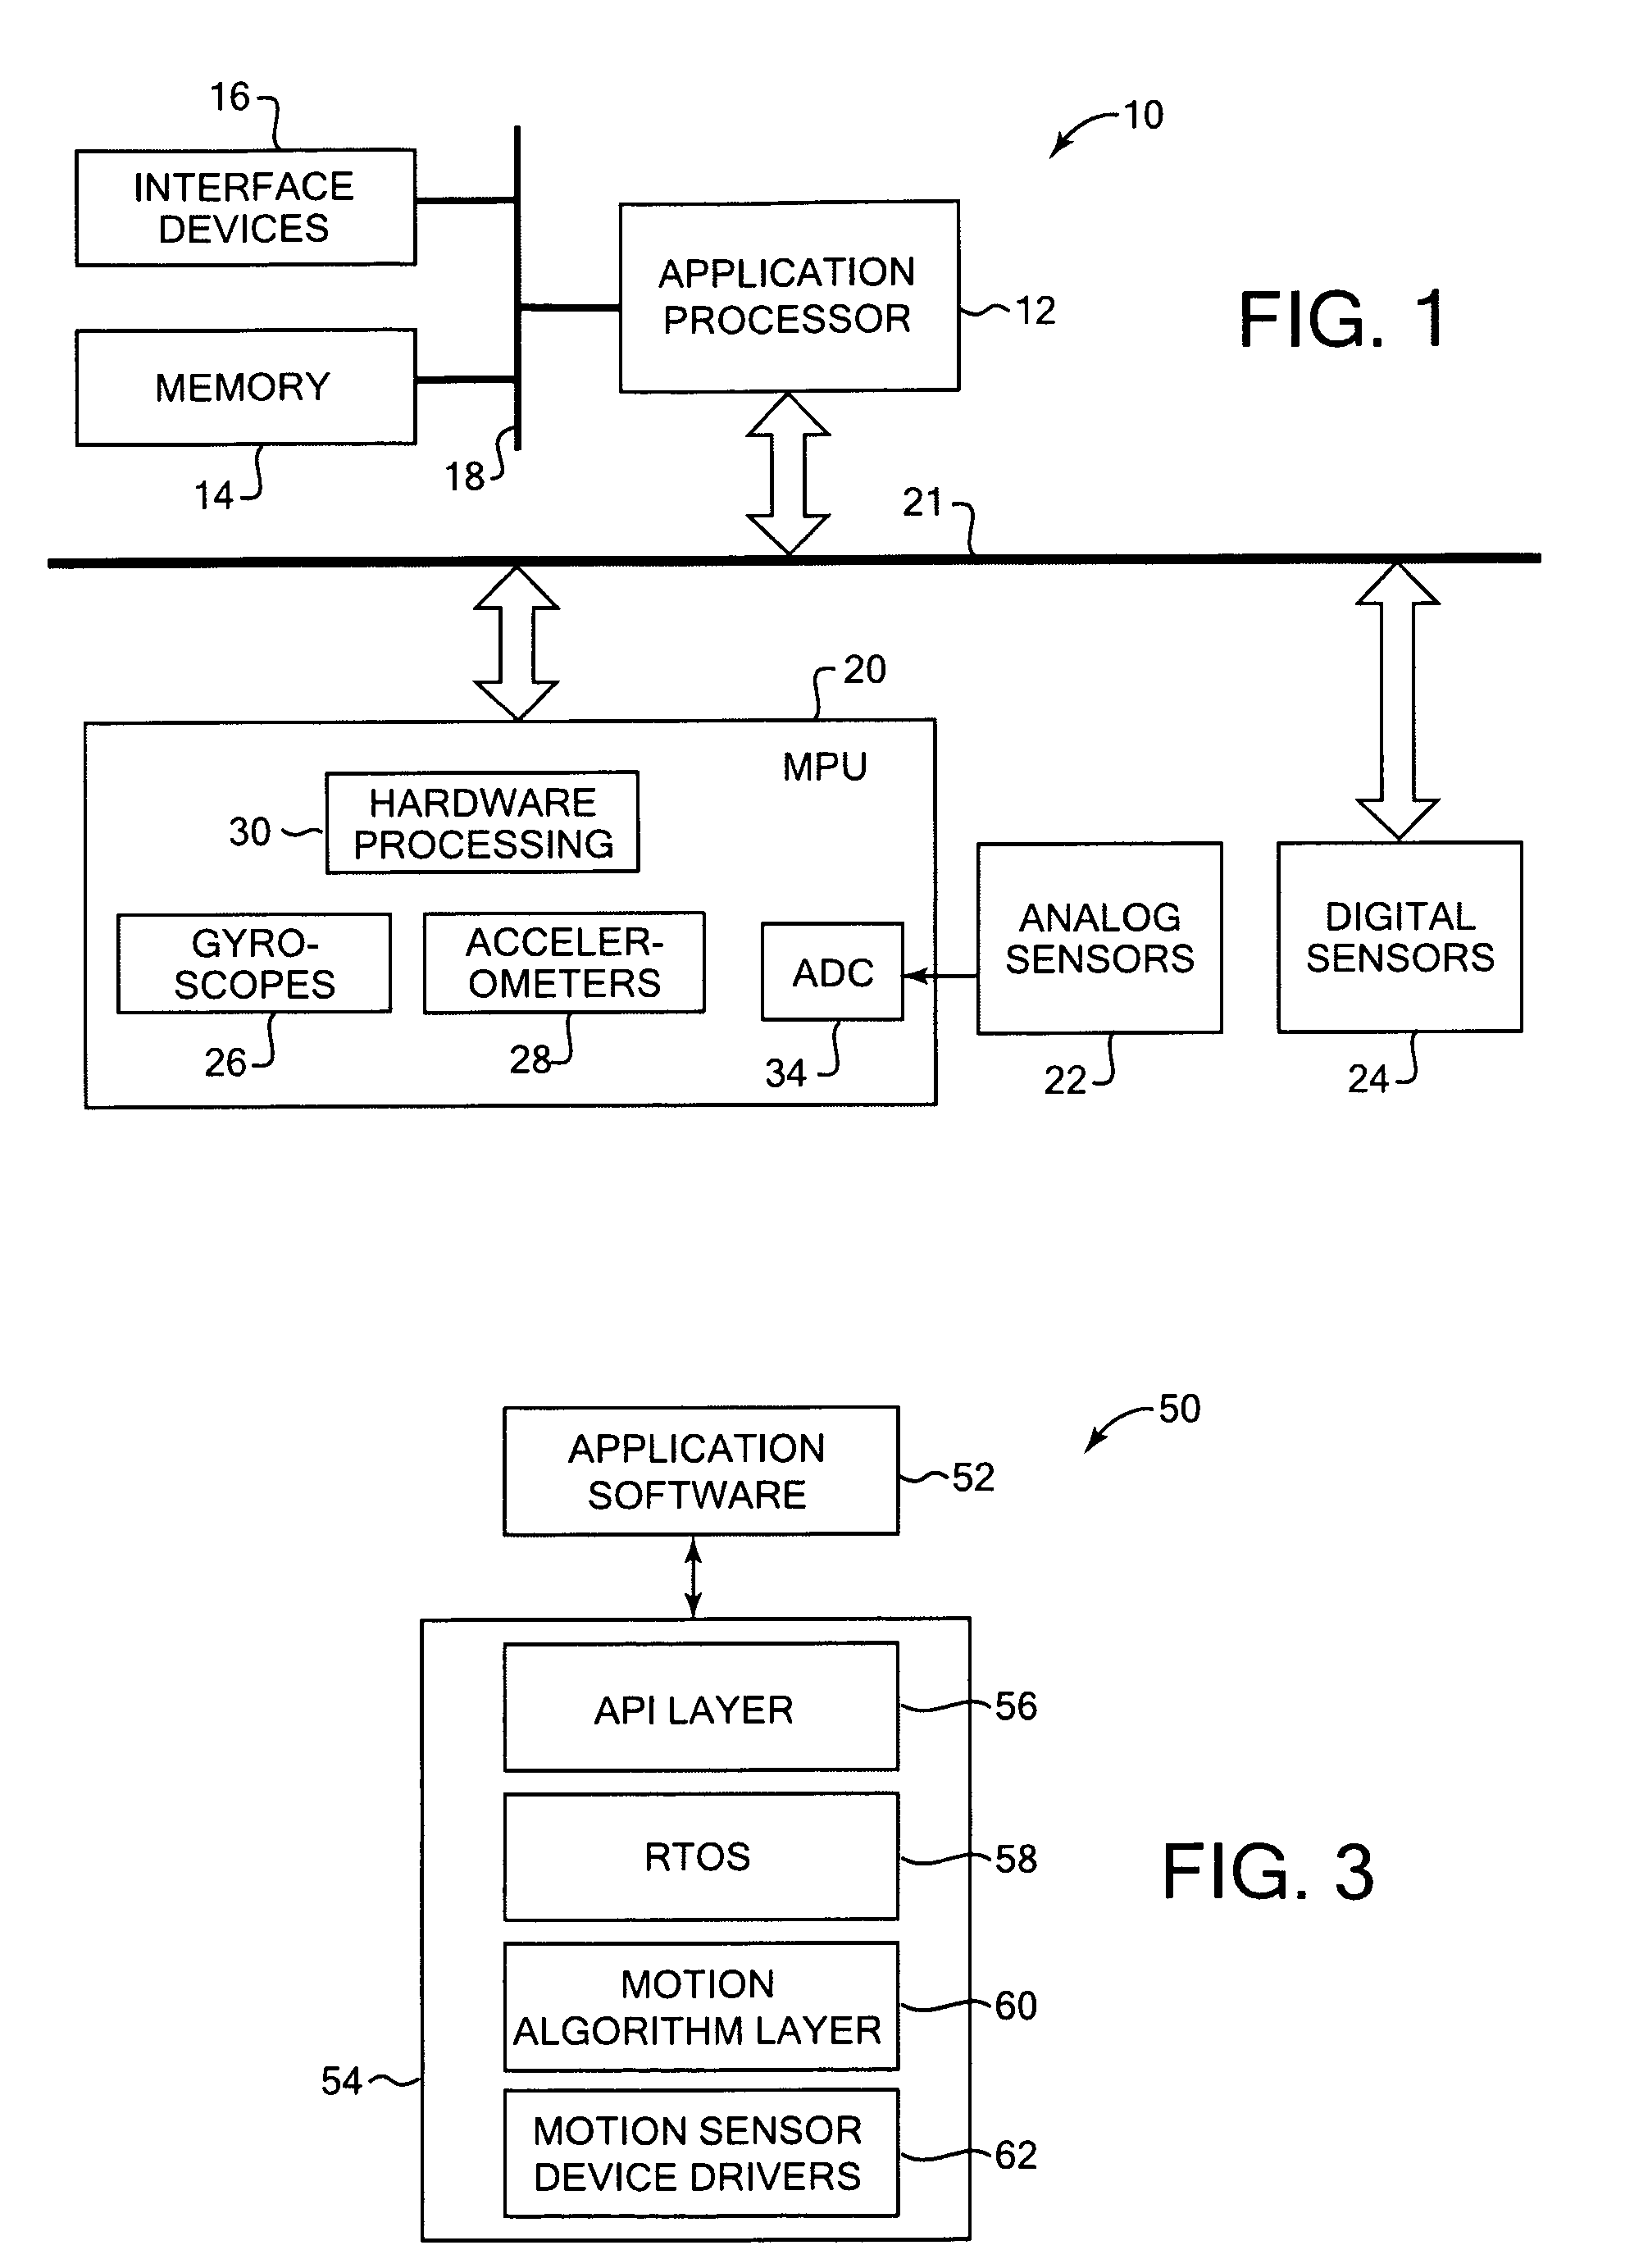 Interfacing application programs and motion sensors of a device